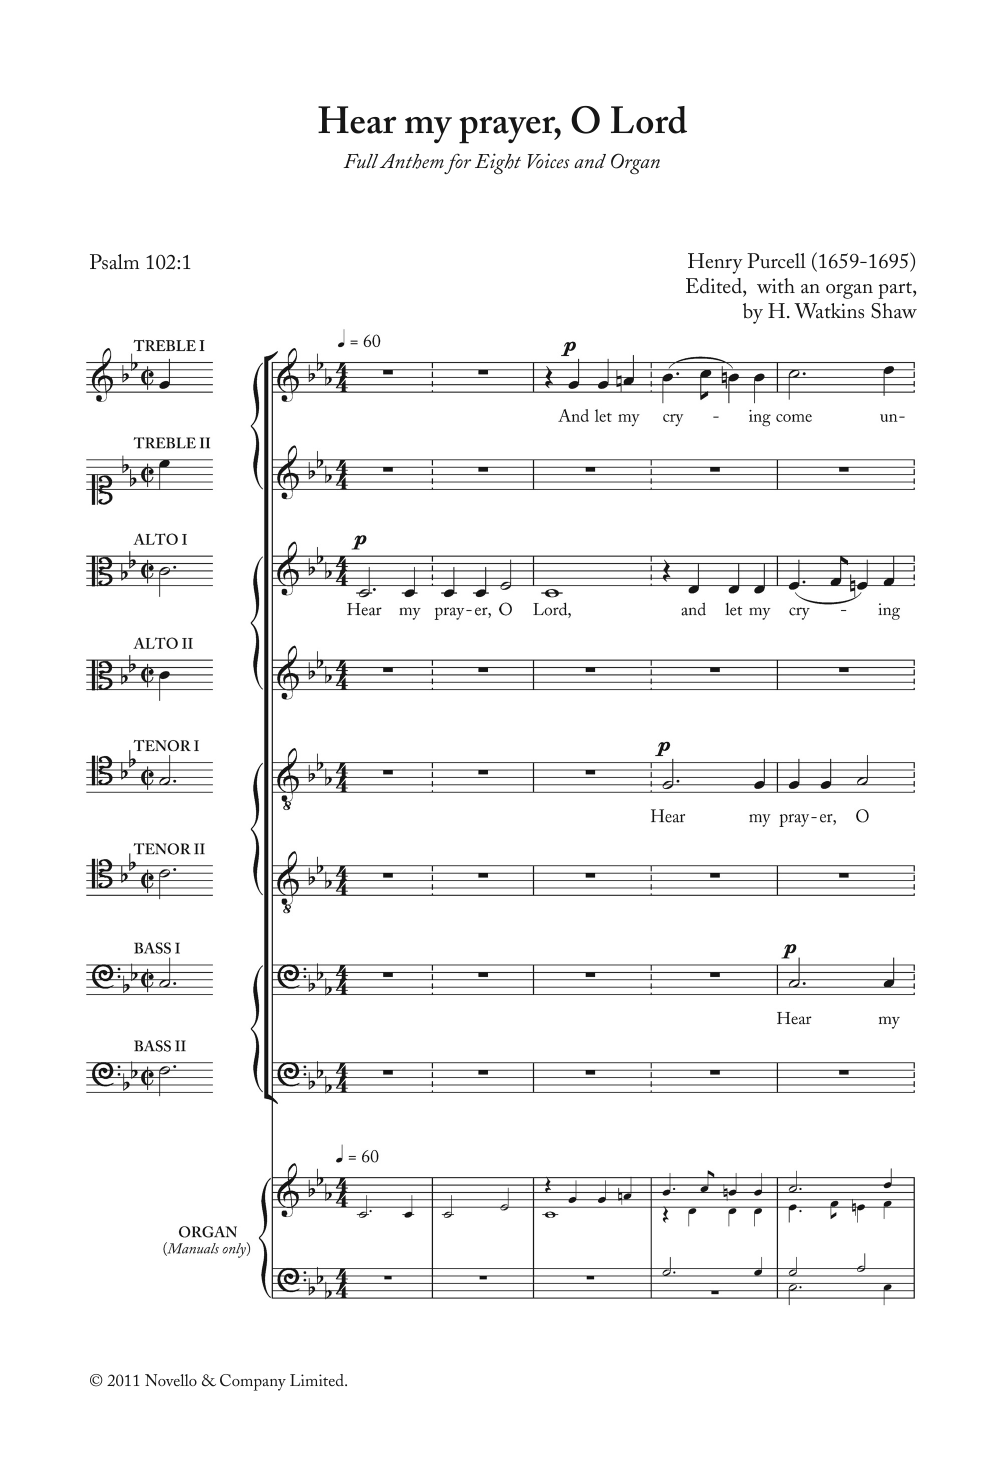 Download Henry Purcell Hear My Prayer, O Lord Sheet Music